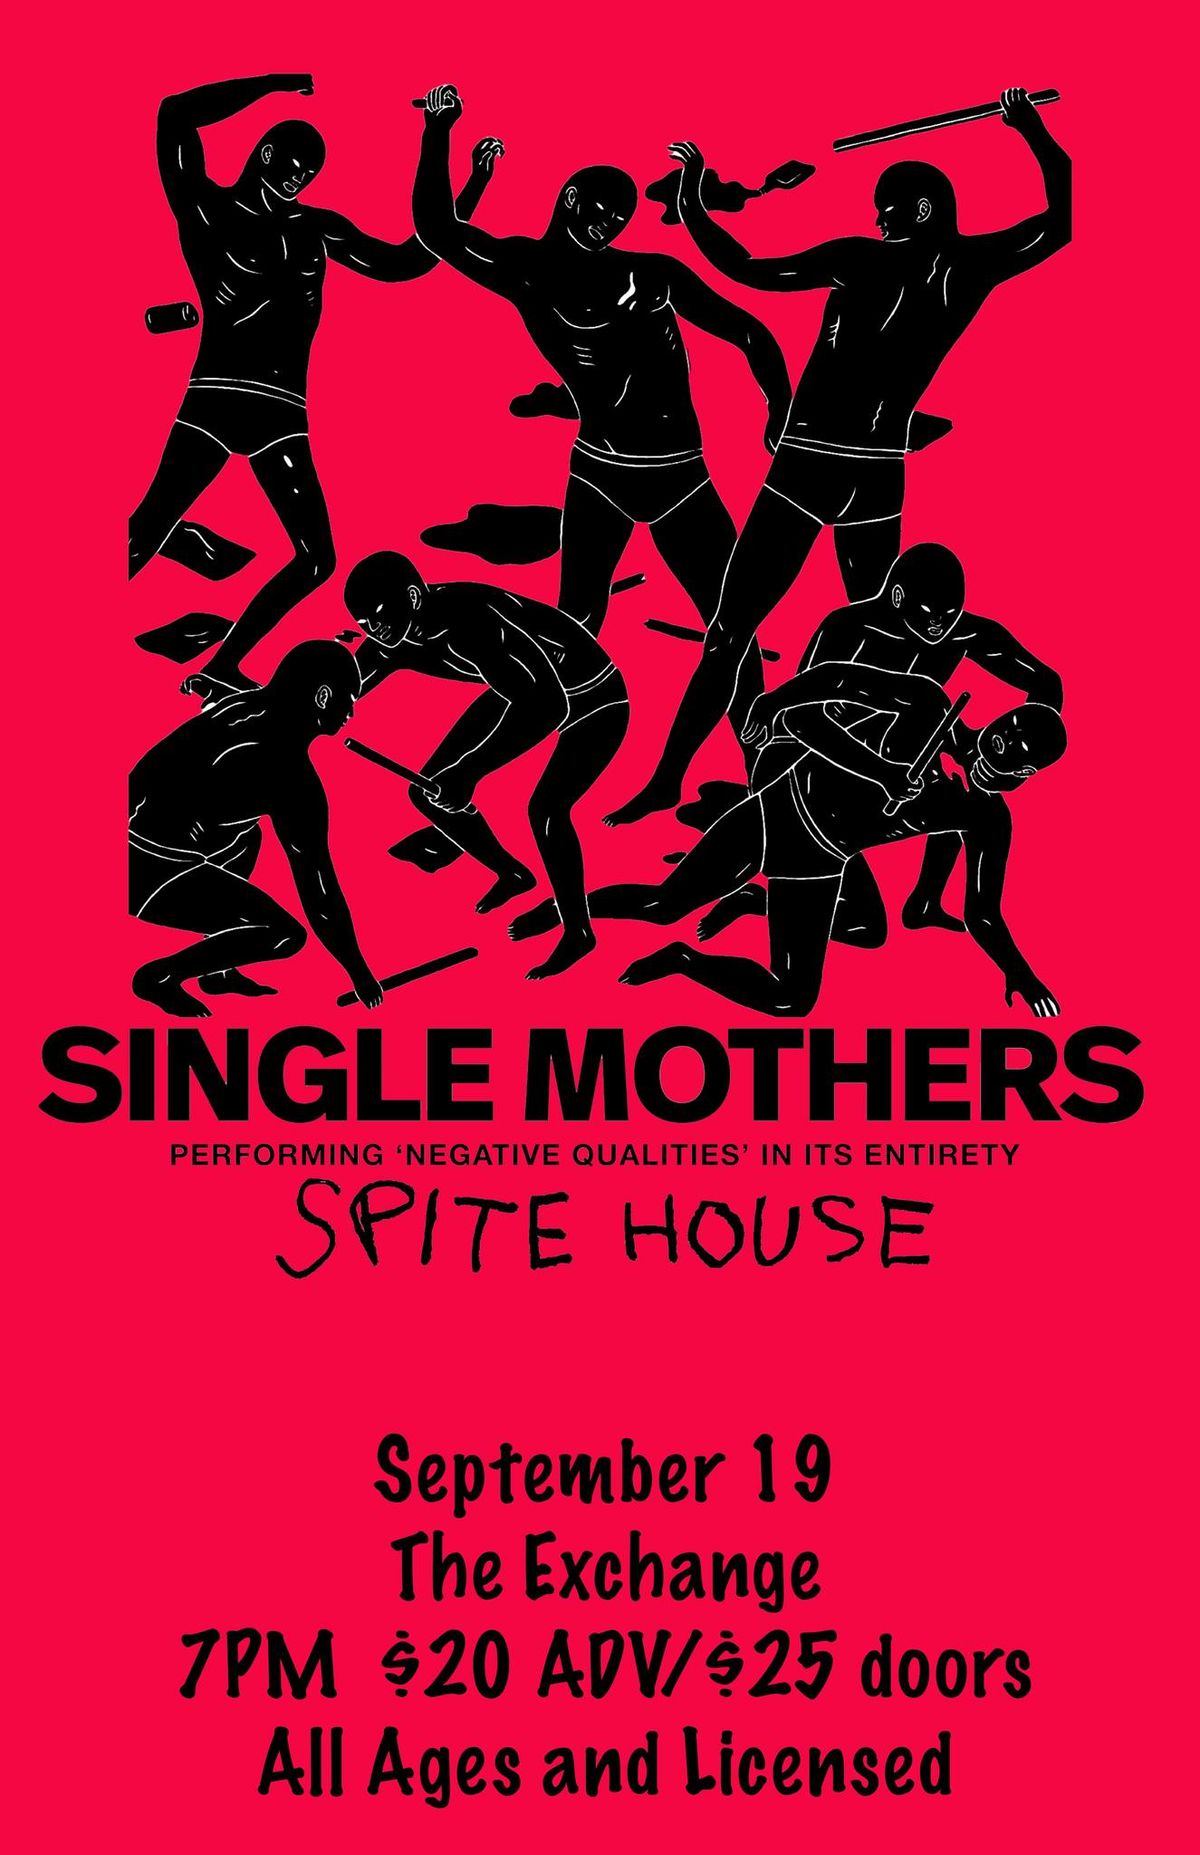 Single Mothers (Ten years of Negative Qualities), Spite House